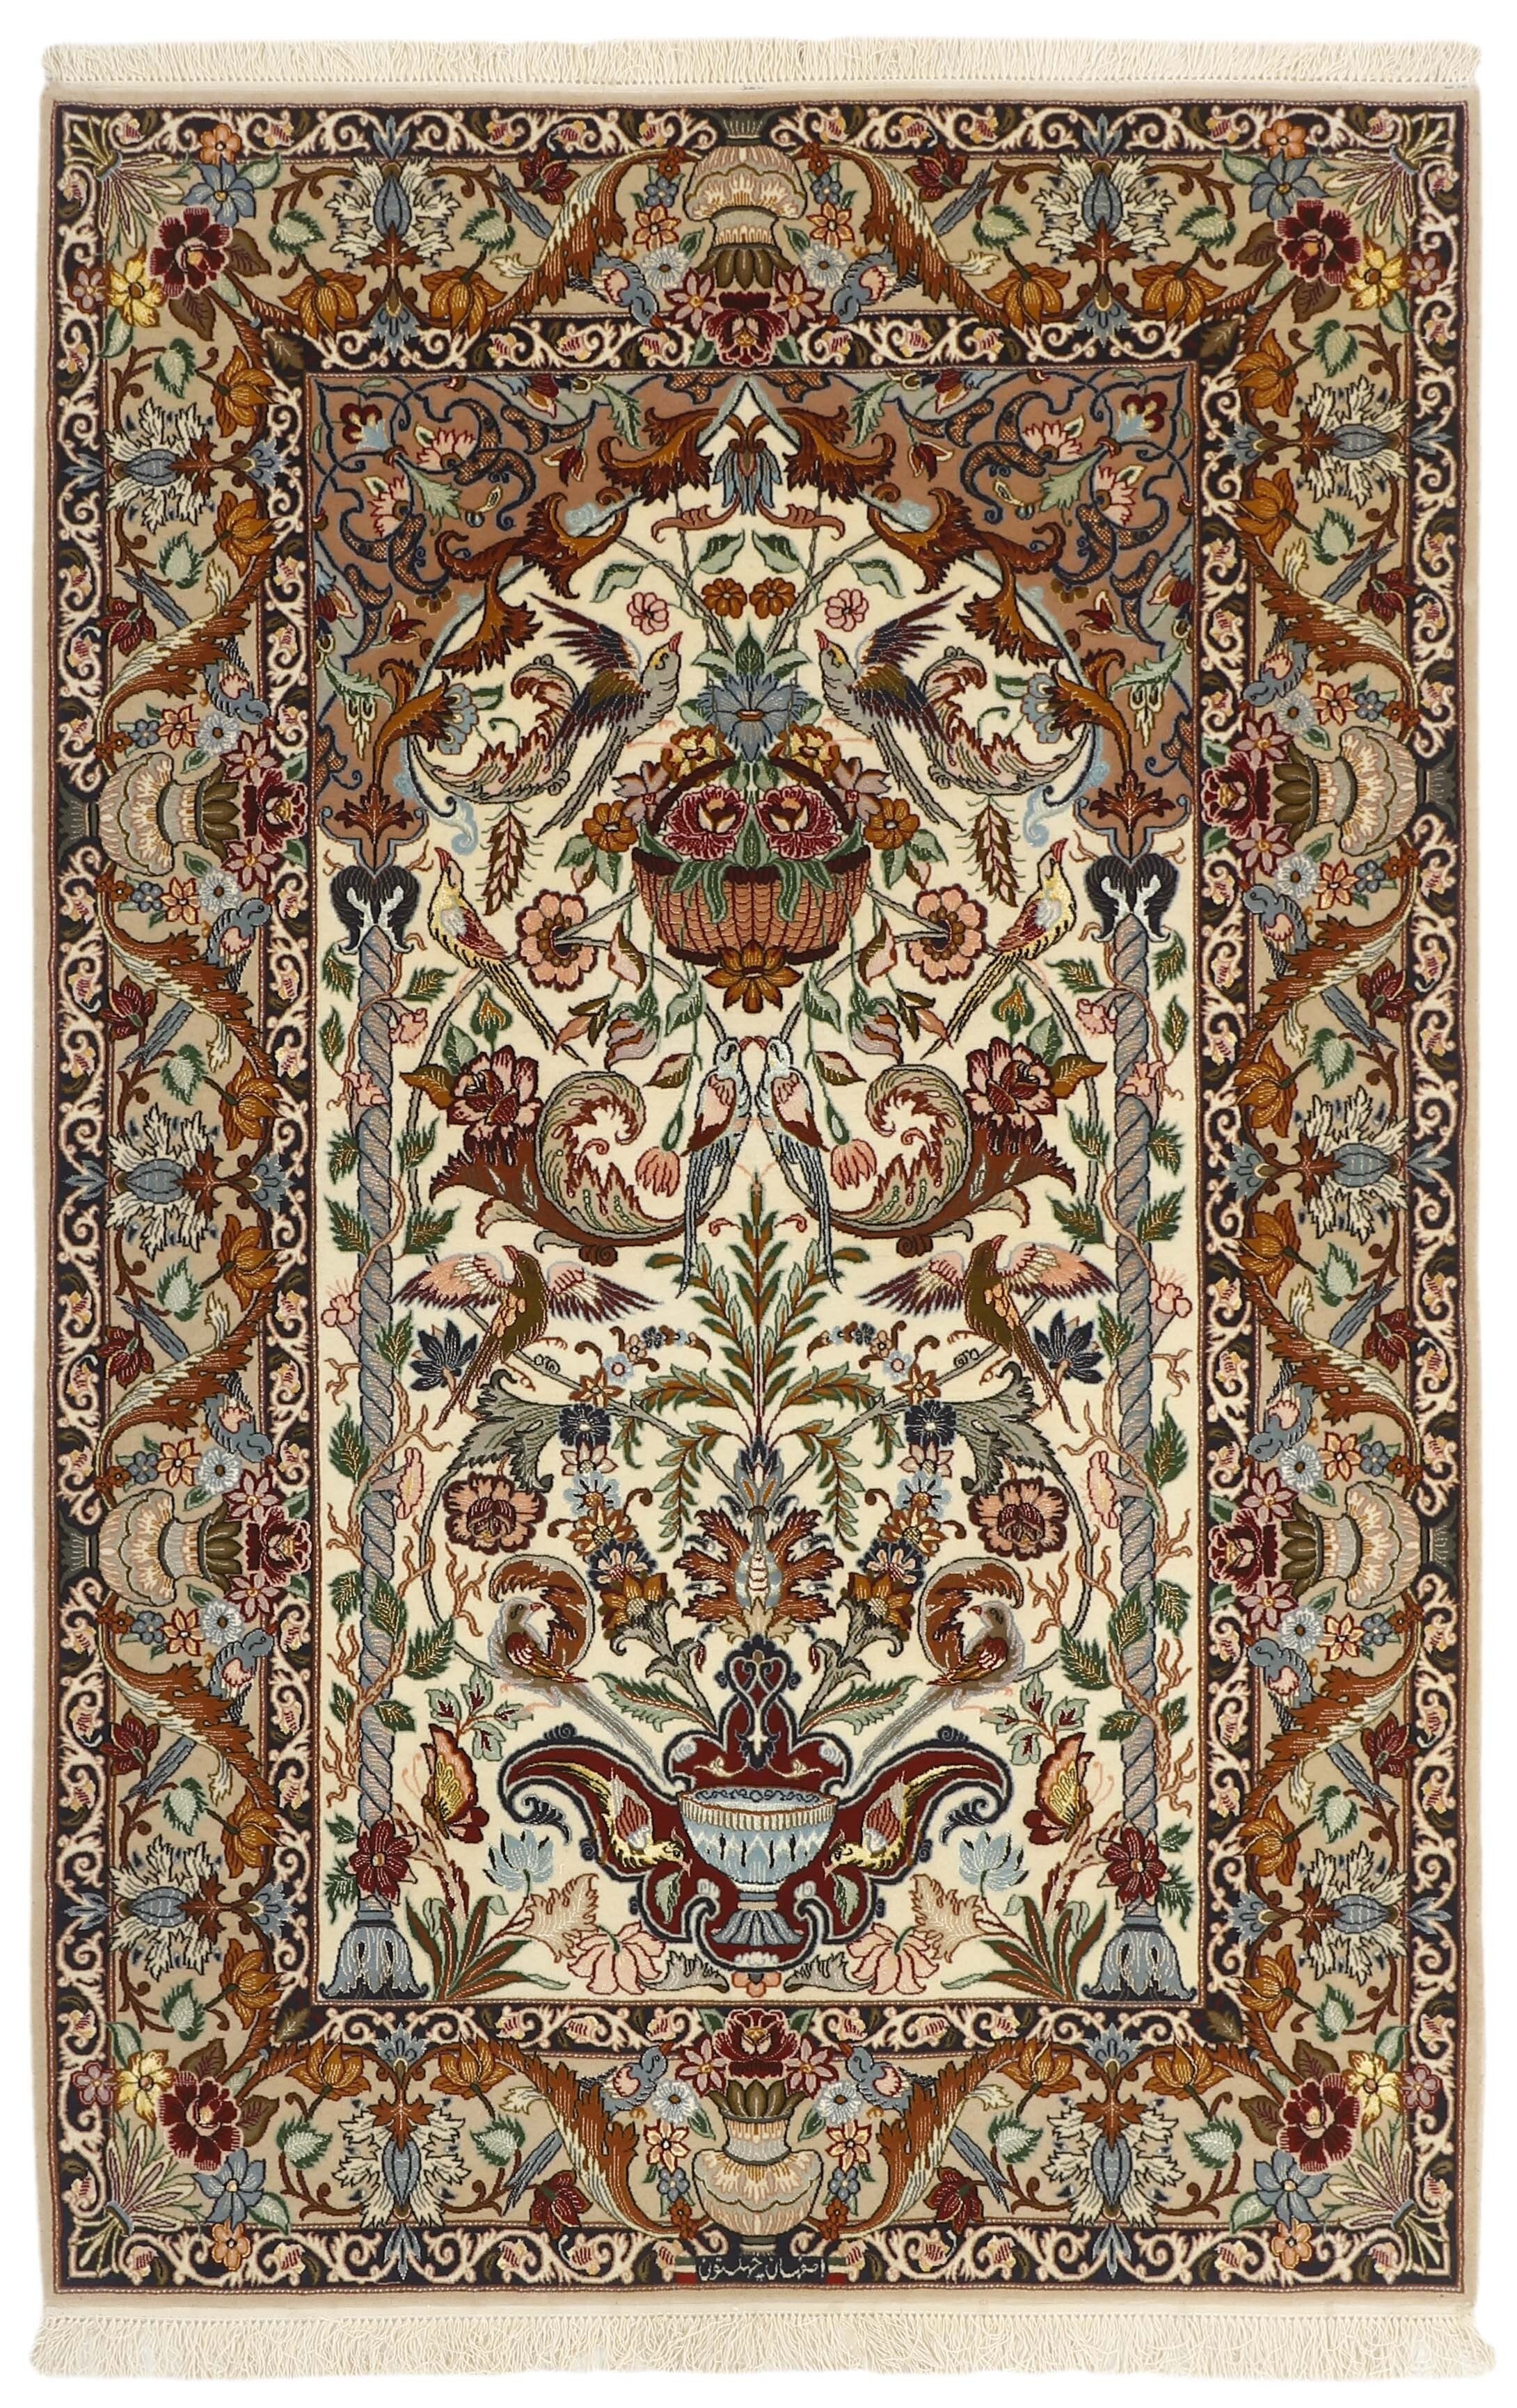 Authentic persian rug with traditional pattern in red, blue, green, beige and brown